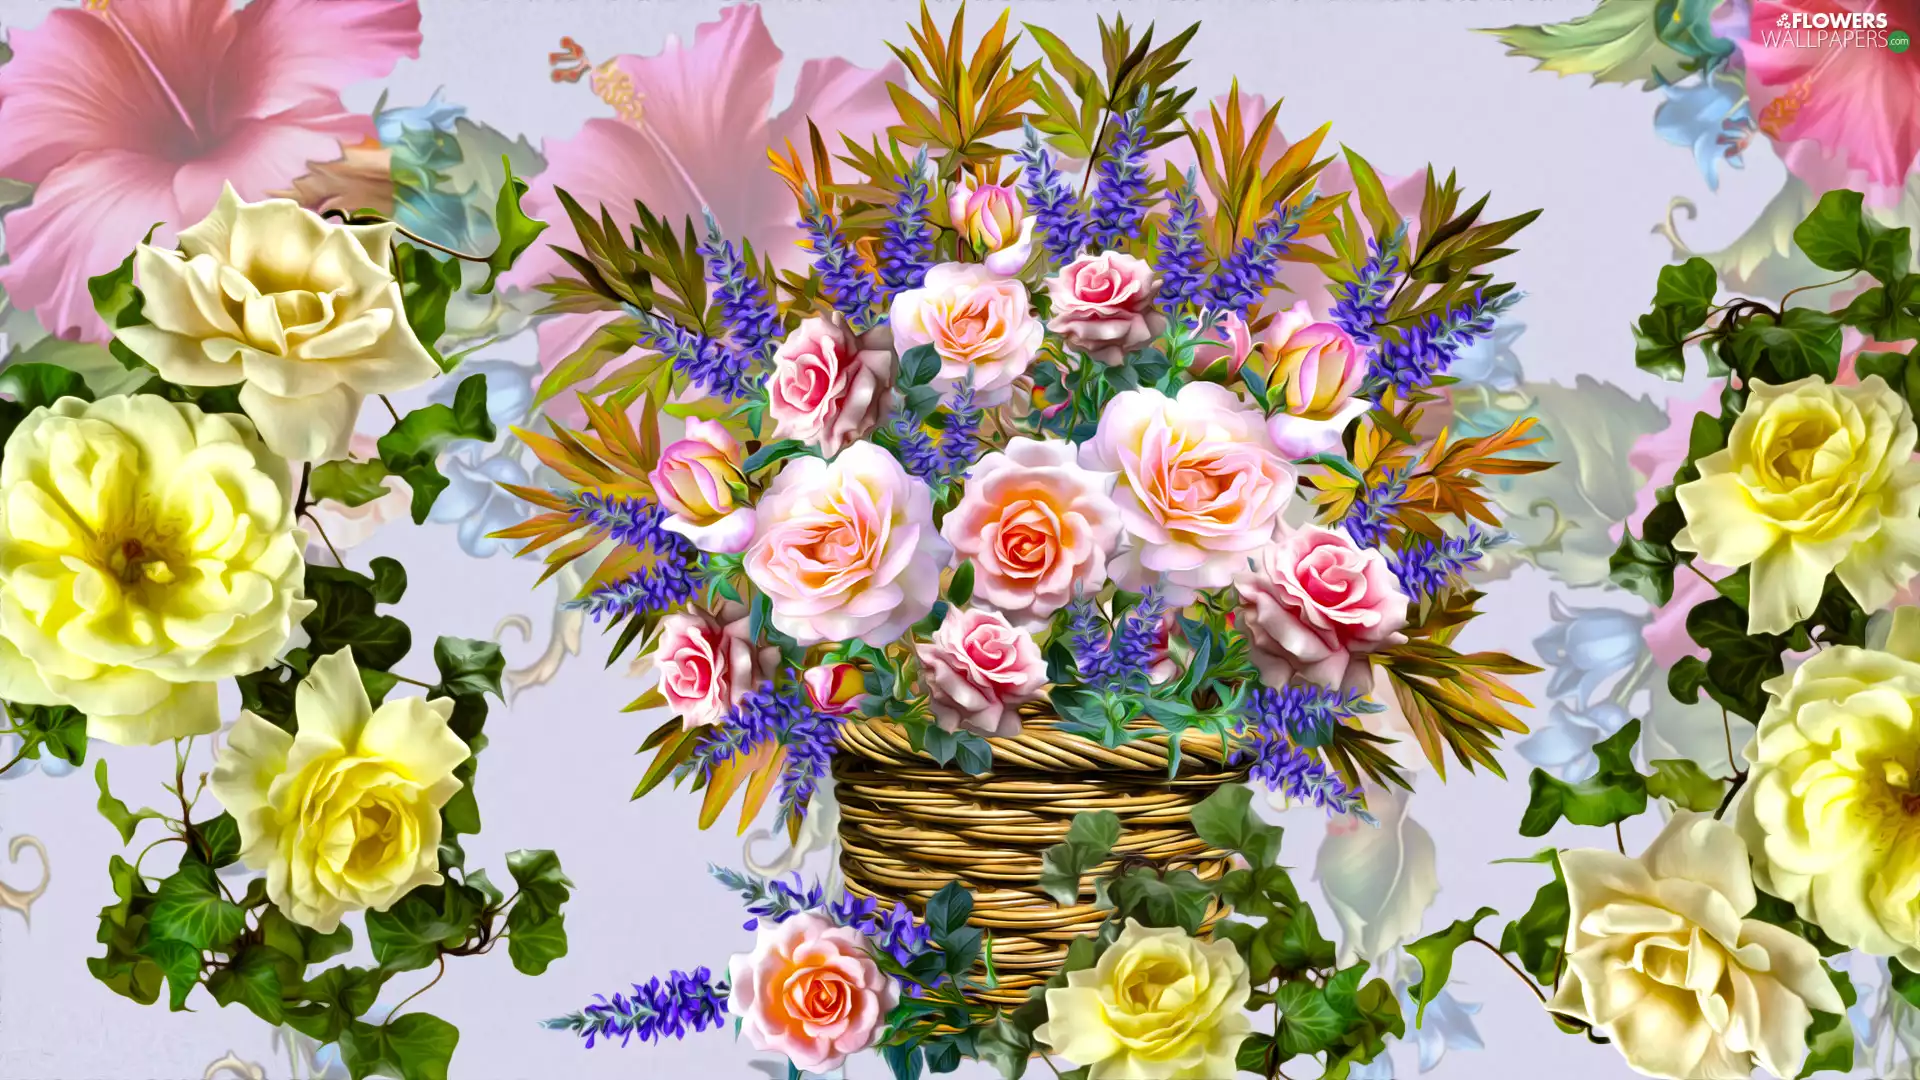 Flowers, basket, graphics, roses